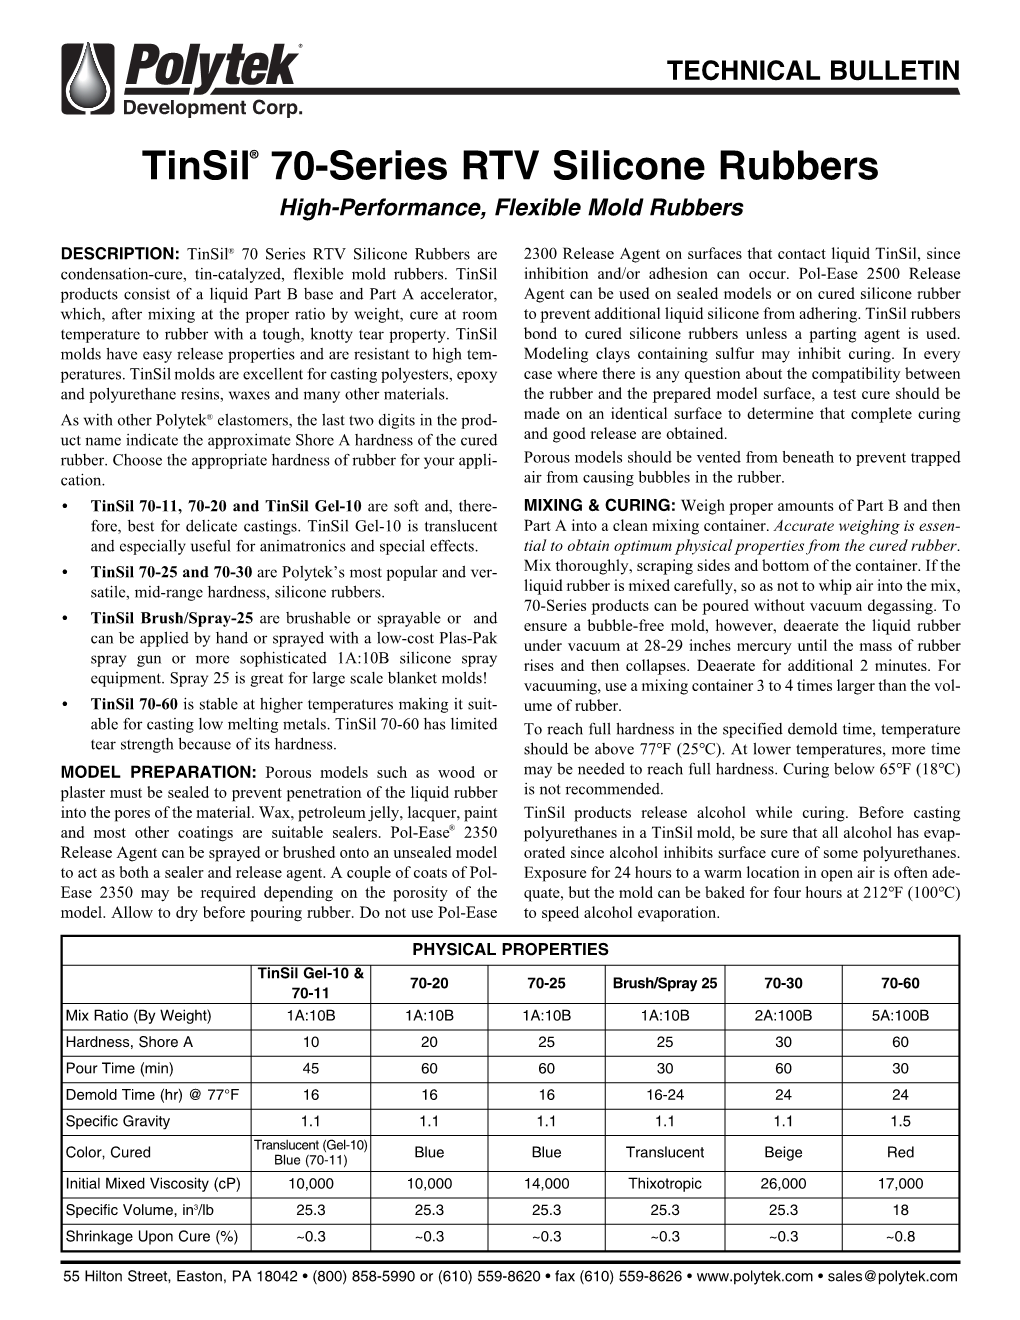 Tinsil® 70-Series RTV Silicone Rubbers High-Performance, Flexible Mold Rubbers